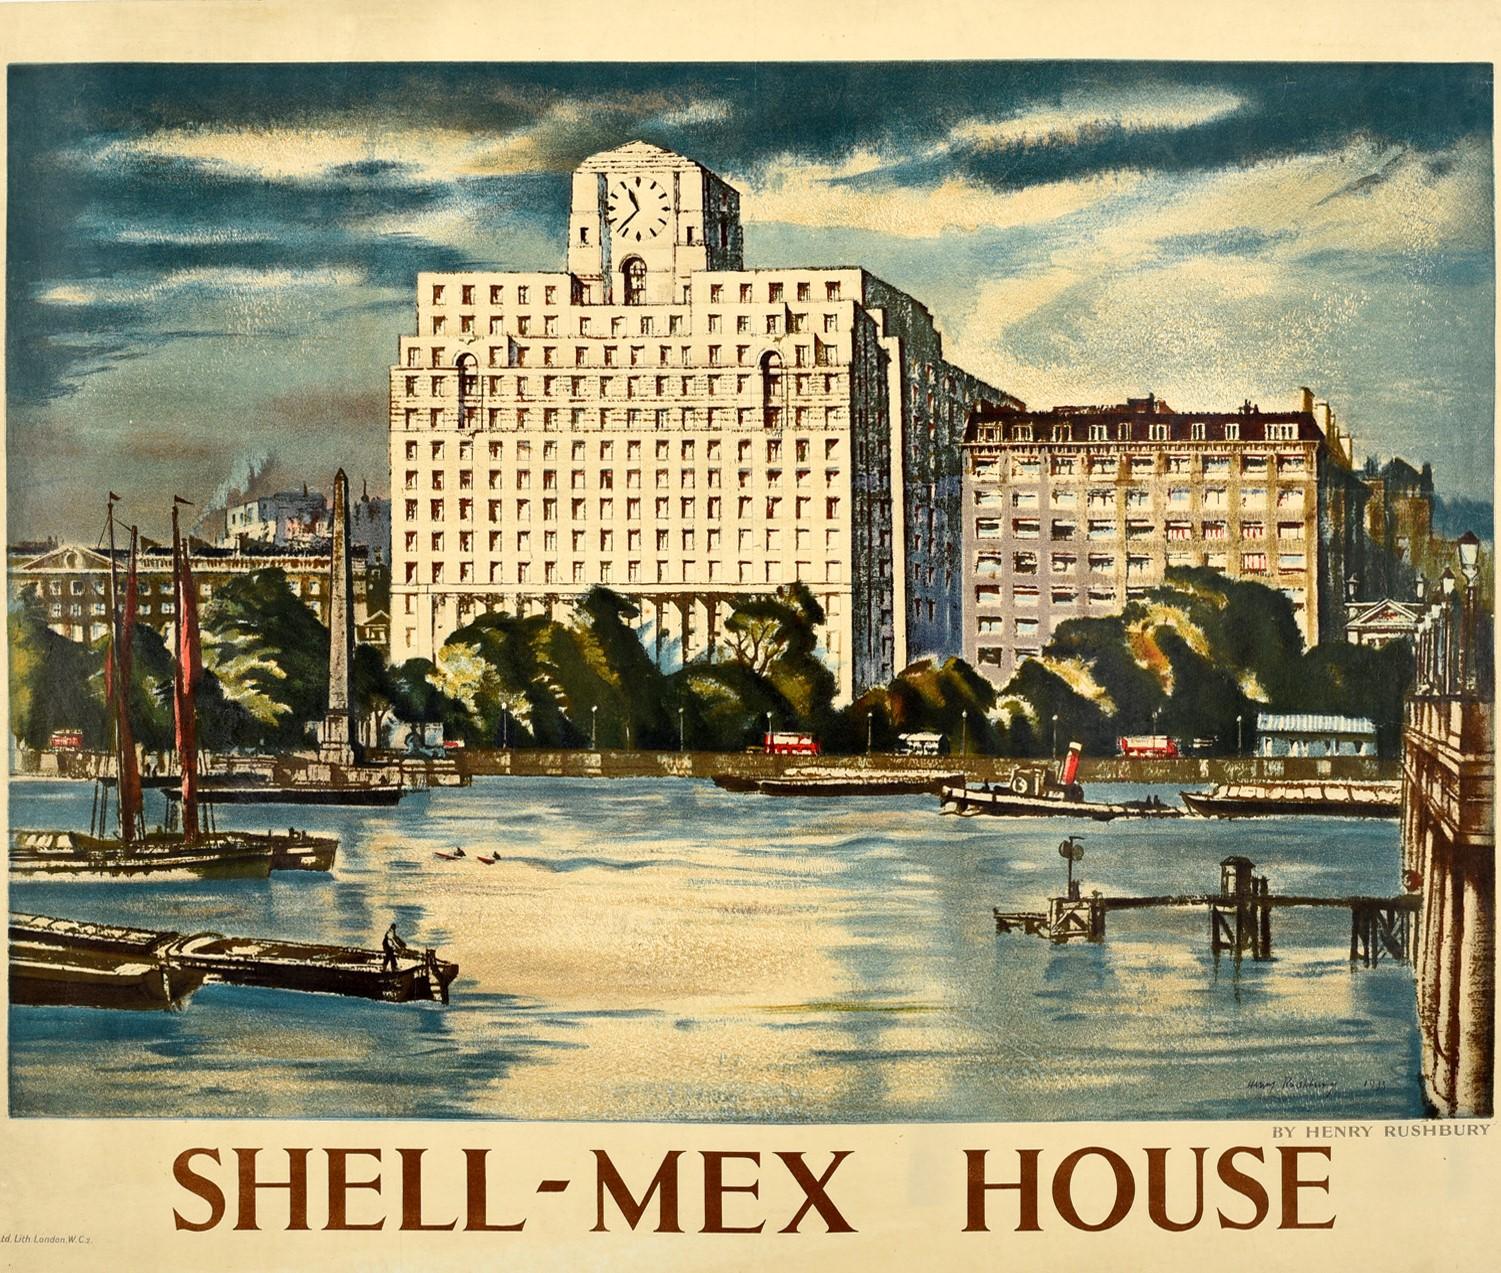 Original vintage poster featuring a painting by Sir Henry Rushbury (1889-1968) of Shell-Mex House with its clock face below a dramatic sky looming over the green trees on Victoria Embankment by the Egyptian obelisk Cleopatra's Needle with boats on